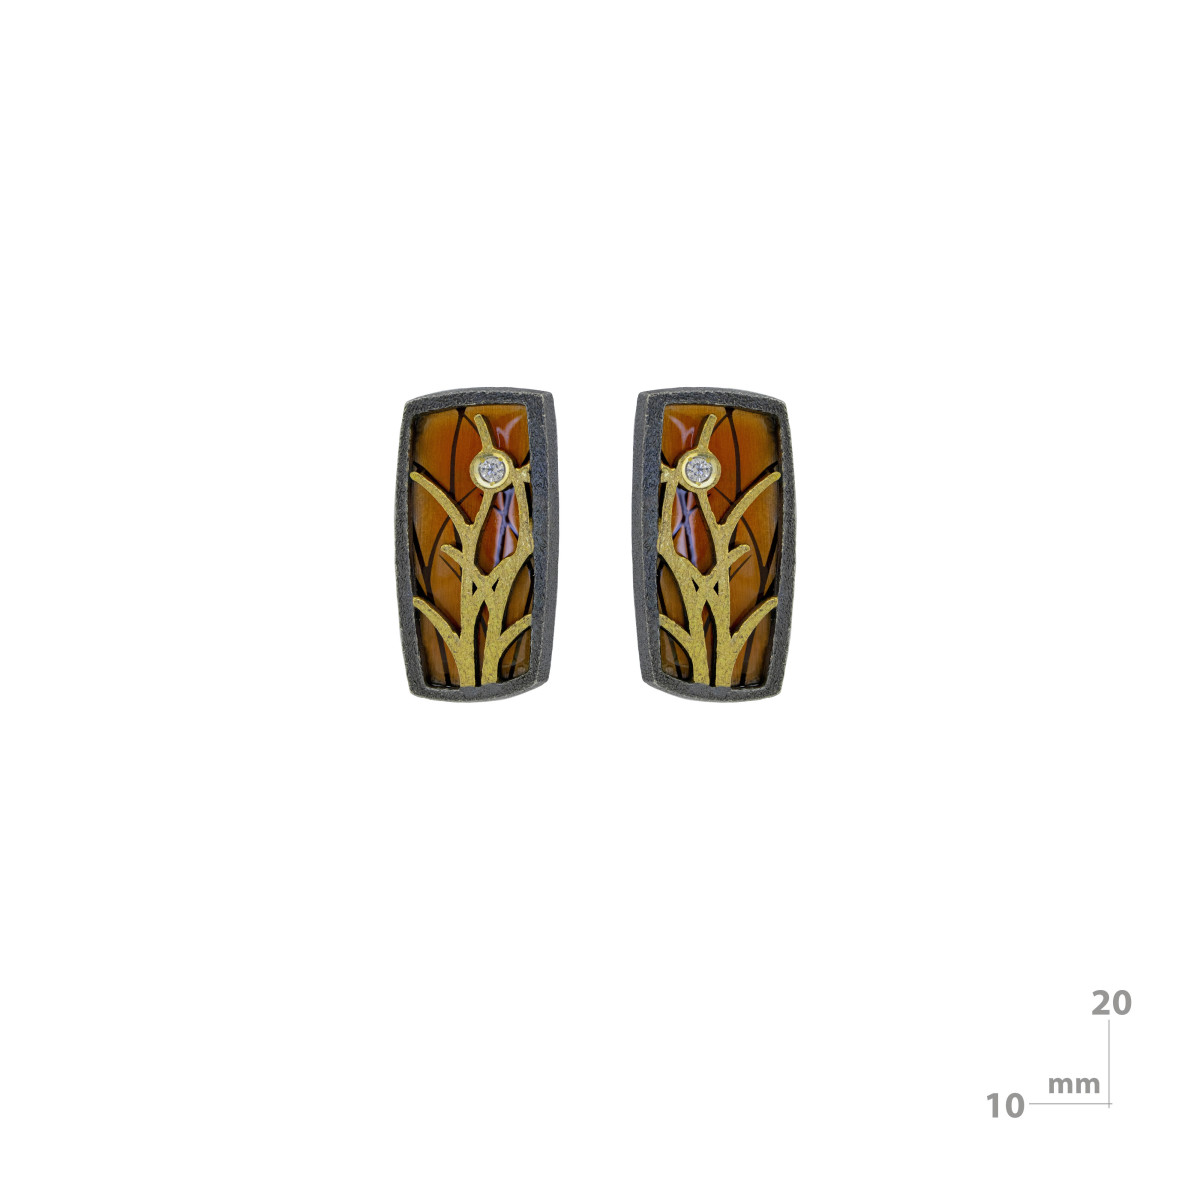 Earrings made of silver, 18k gold, enamel and brilliant